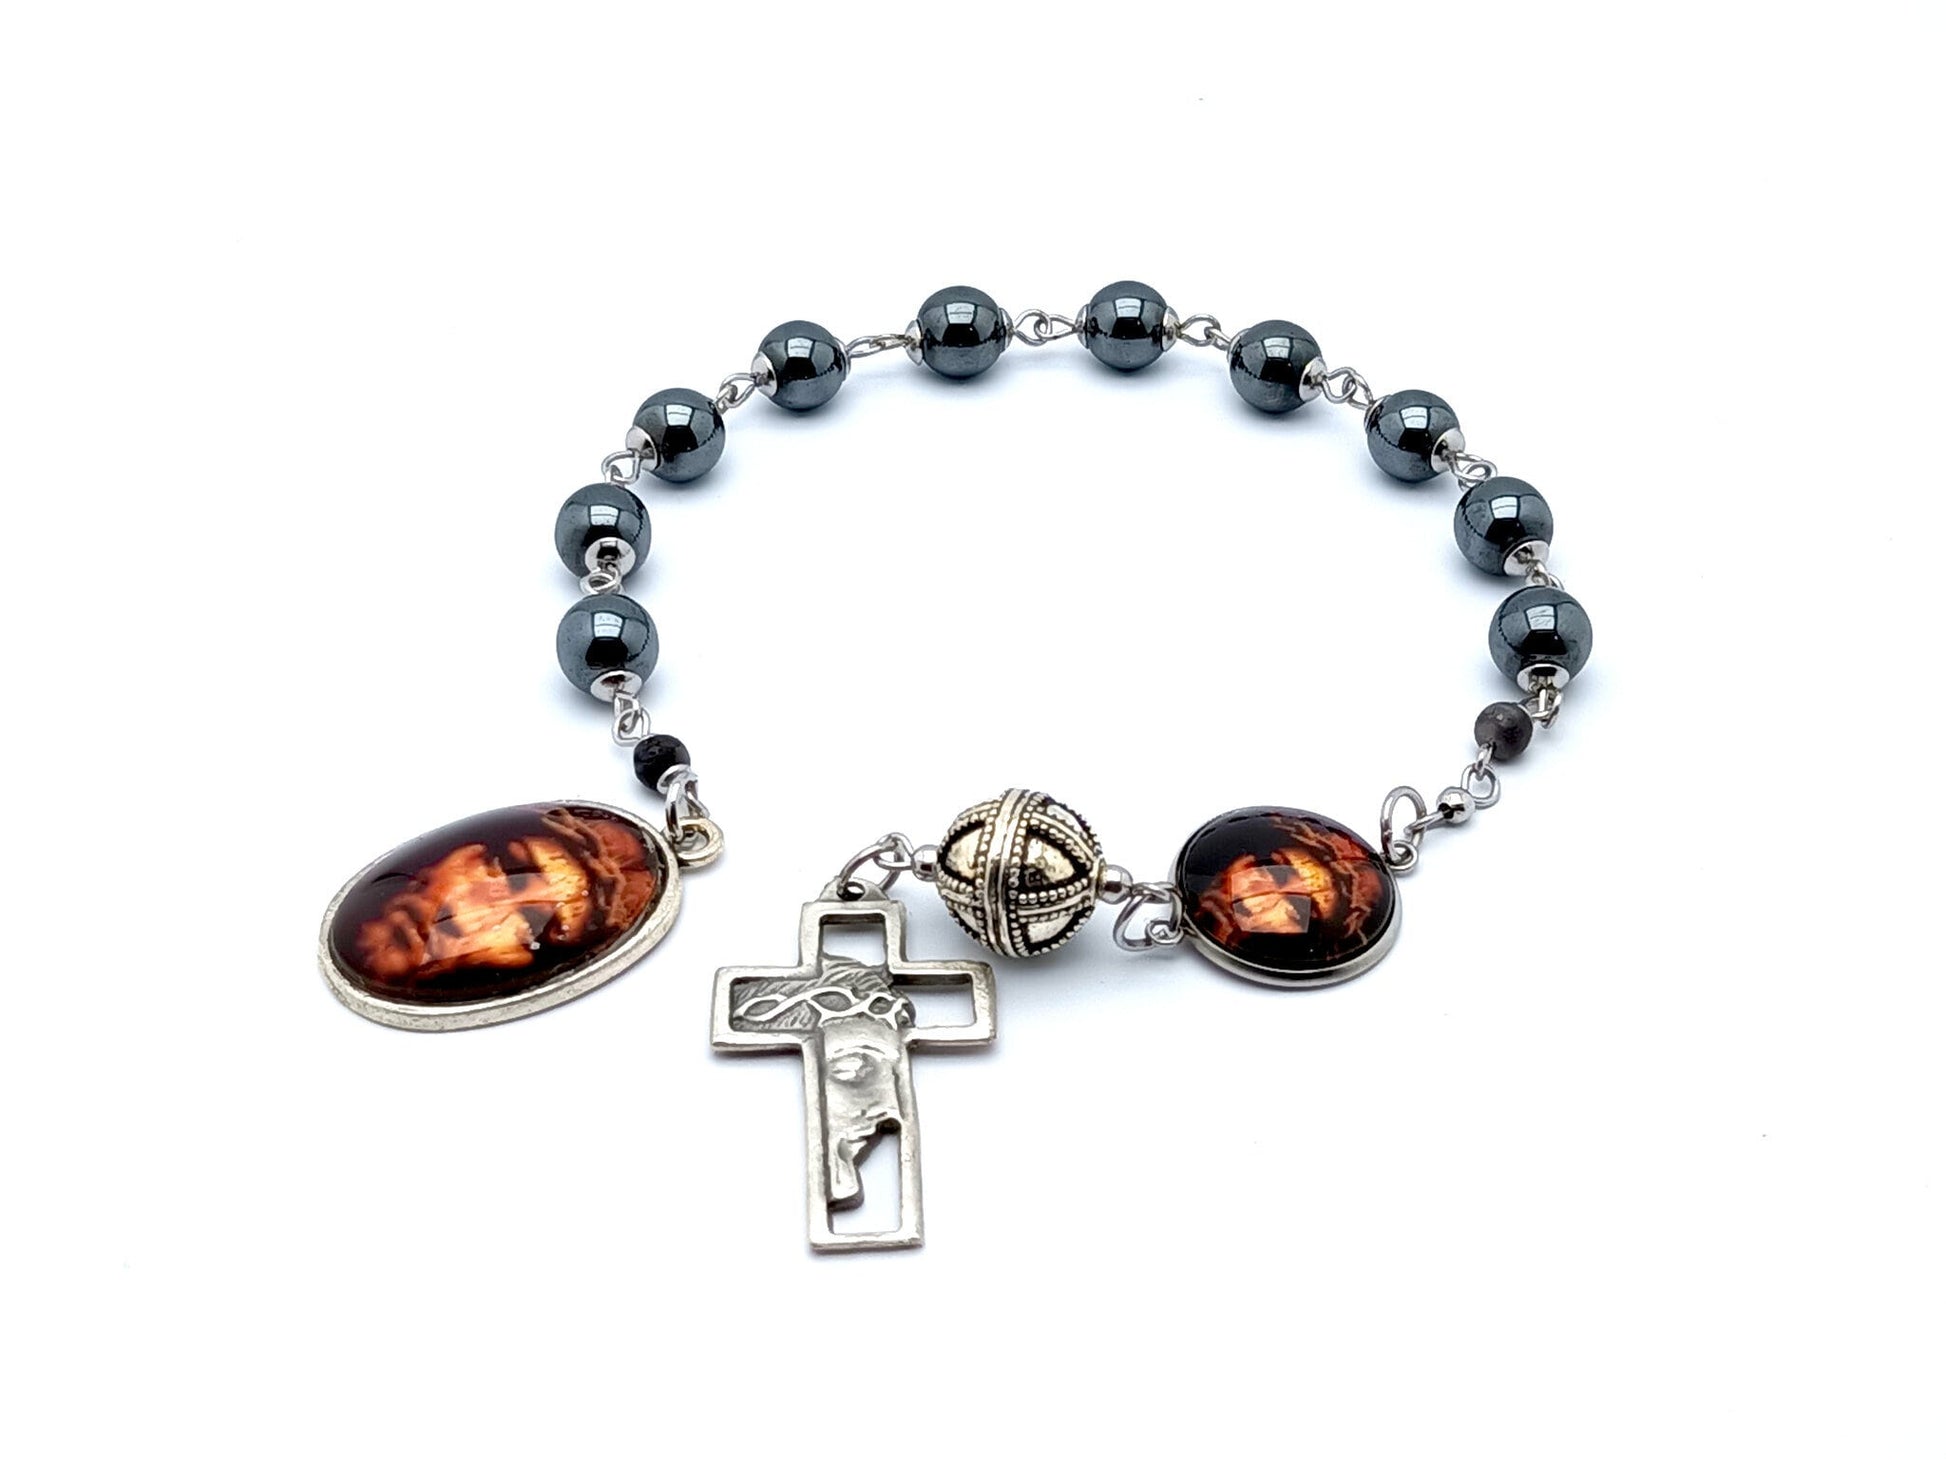 Holy Face of Jesus unique rosary beads hematite gemstone single decade rosary beads with Crowning with Thorns cross.